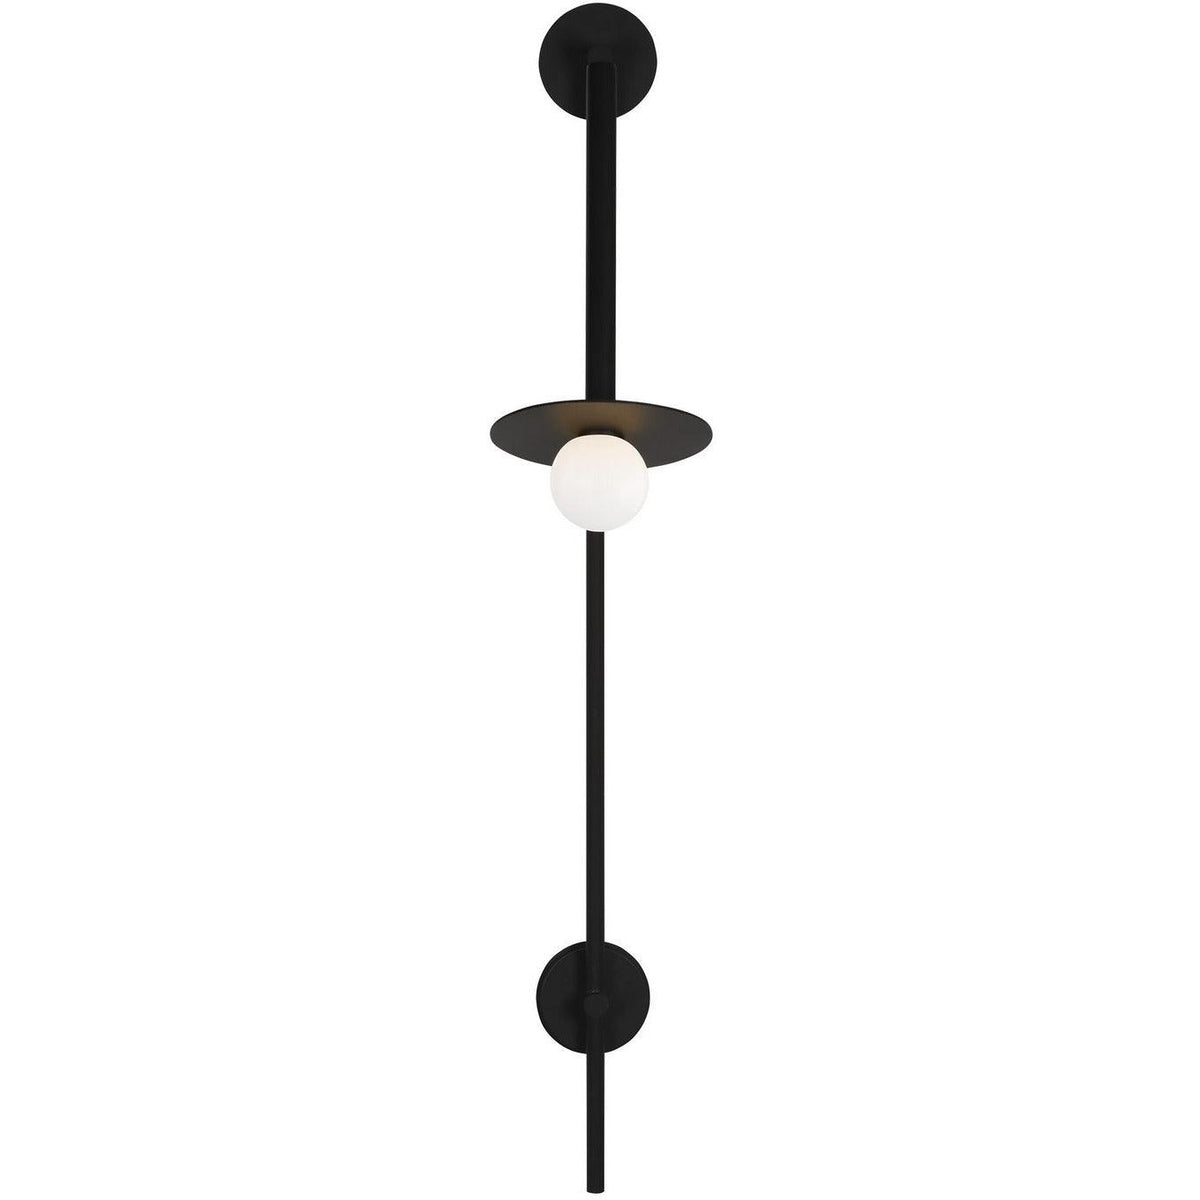 Visual Comfort Studio Collection - Nodes Pivot Wall Sconce - KW1031MBK | Montreal Lighting & Hardware